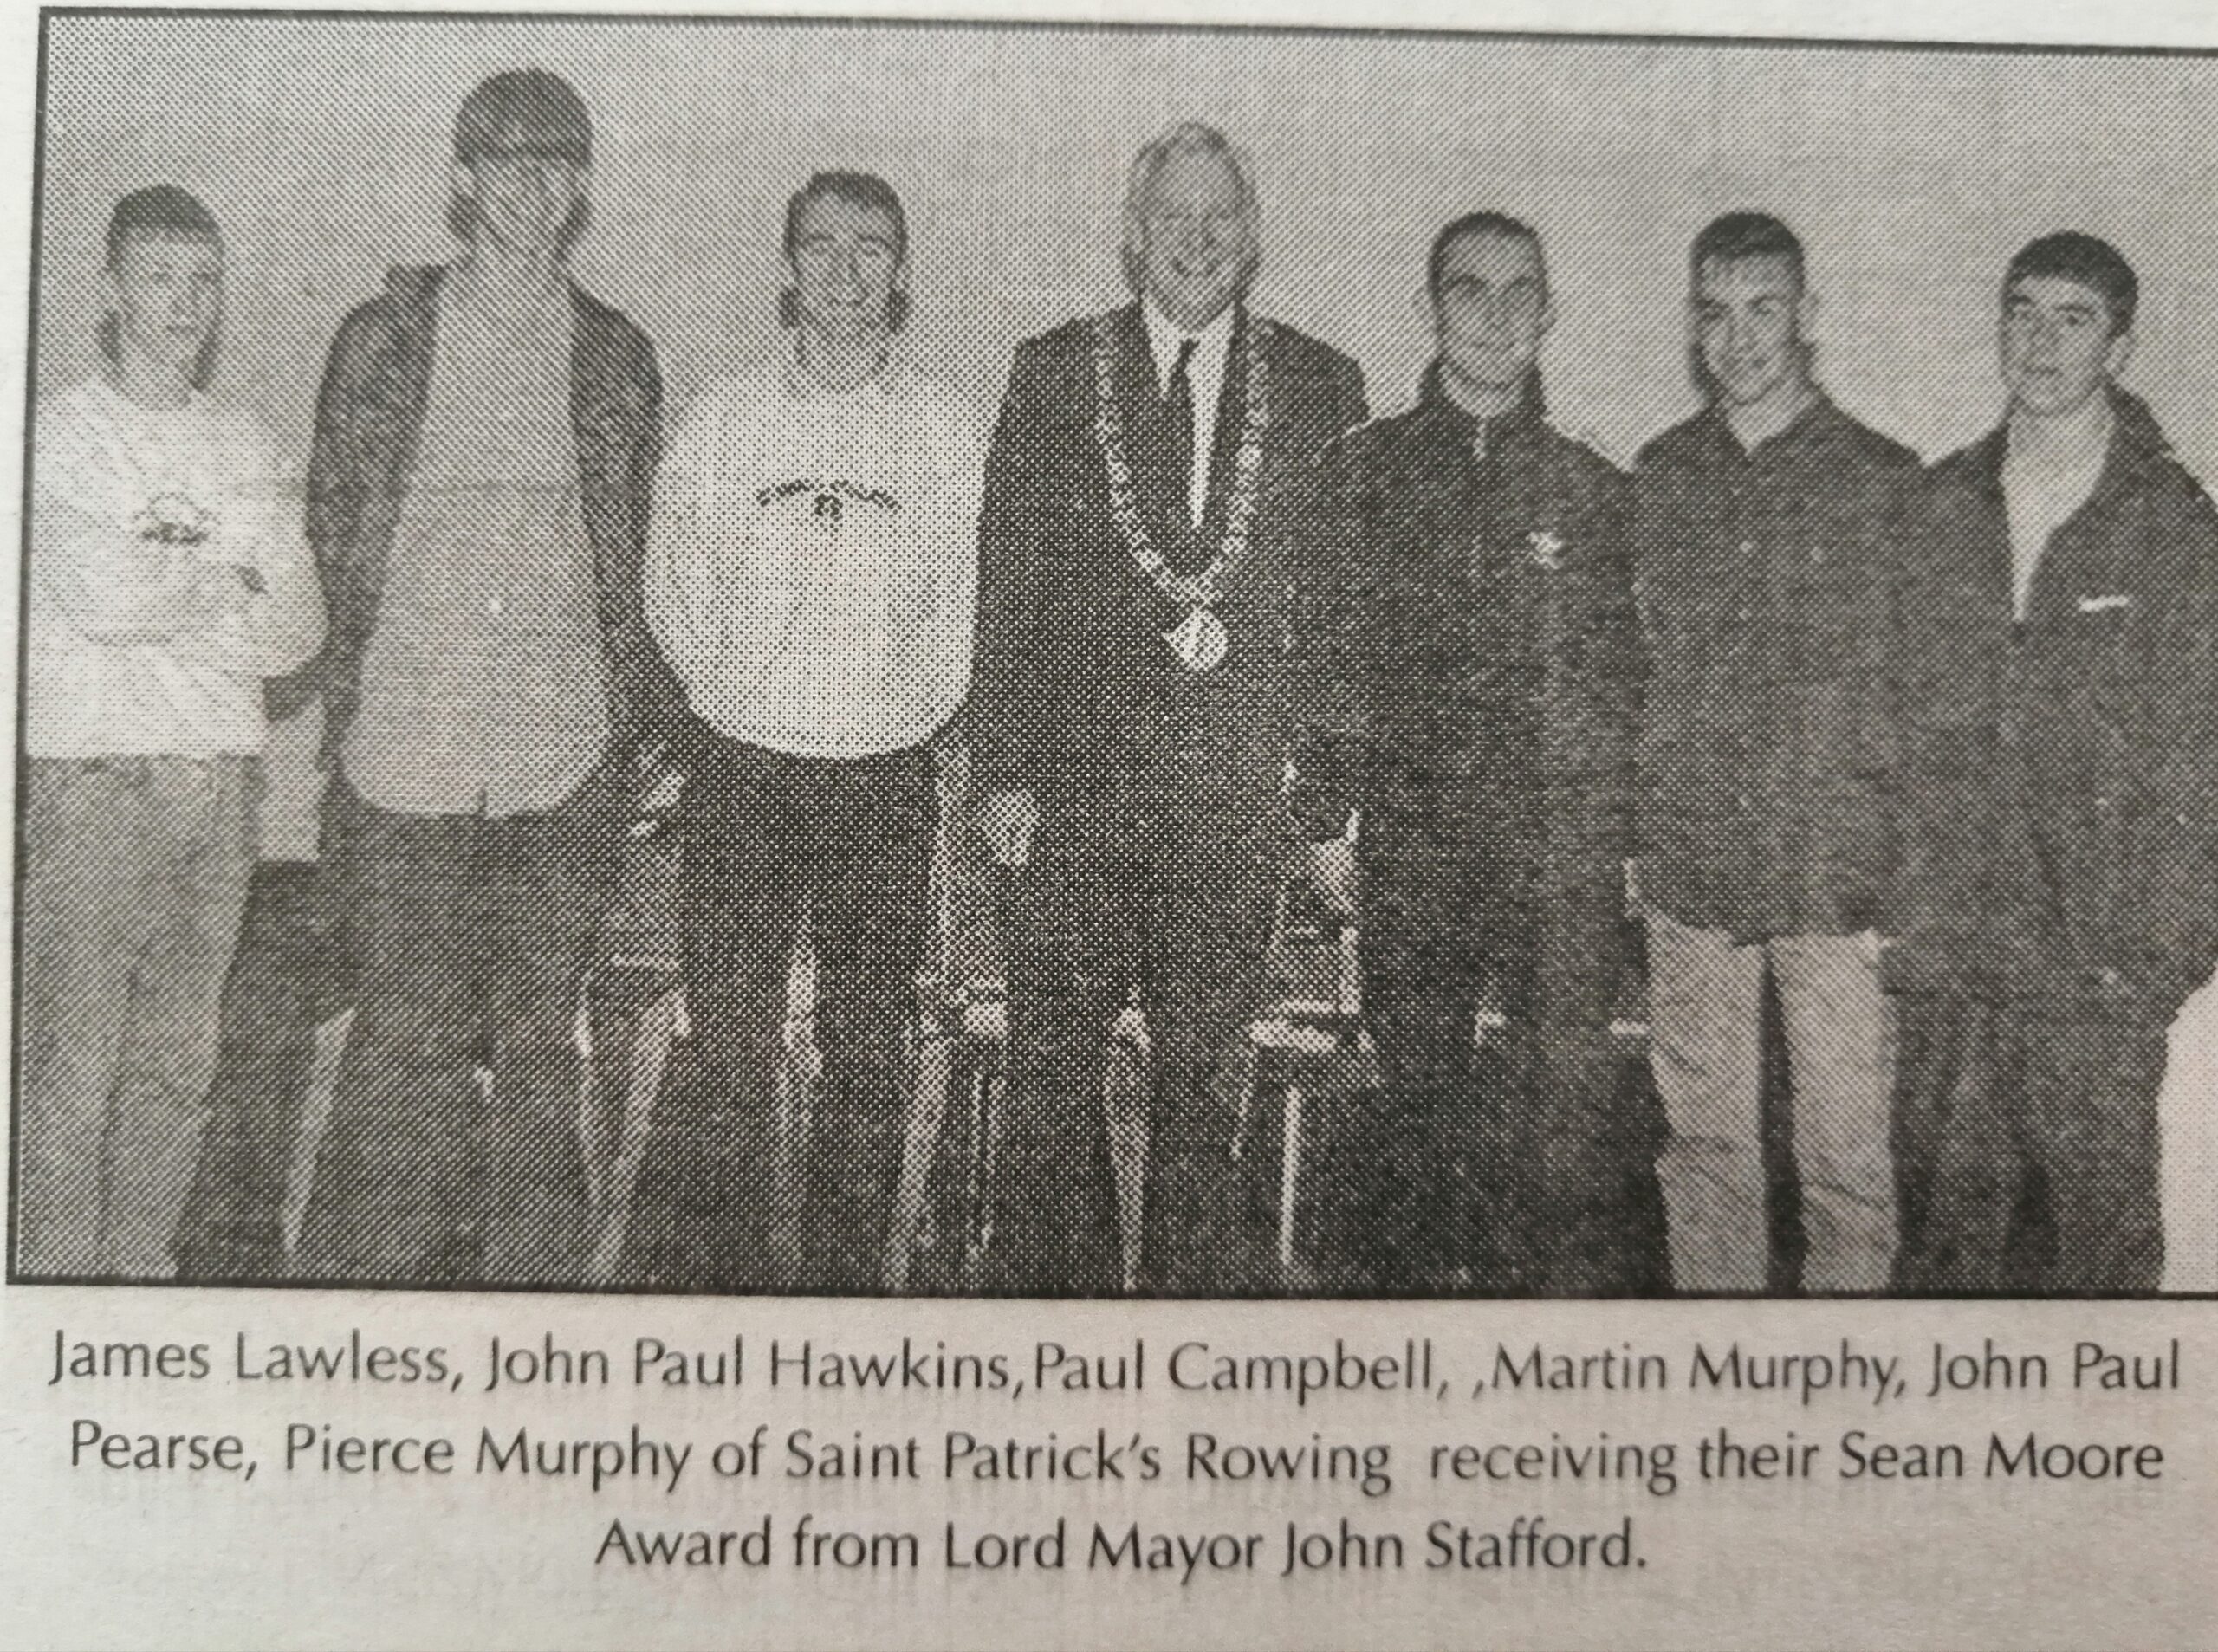 The crew from St Patrick’s Rowing Club receive their Sean Moore Award